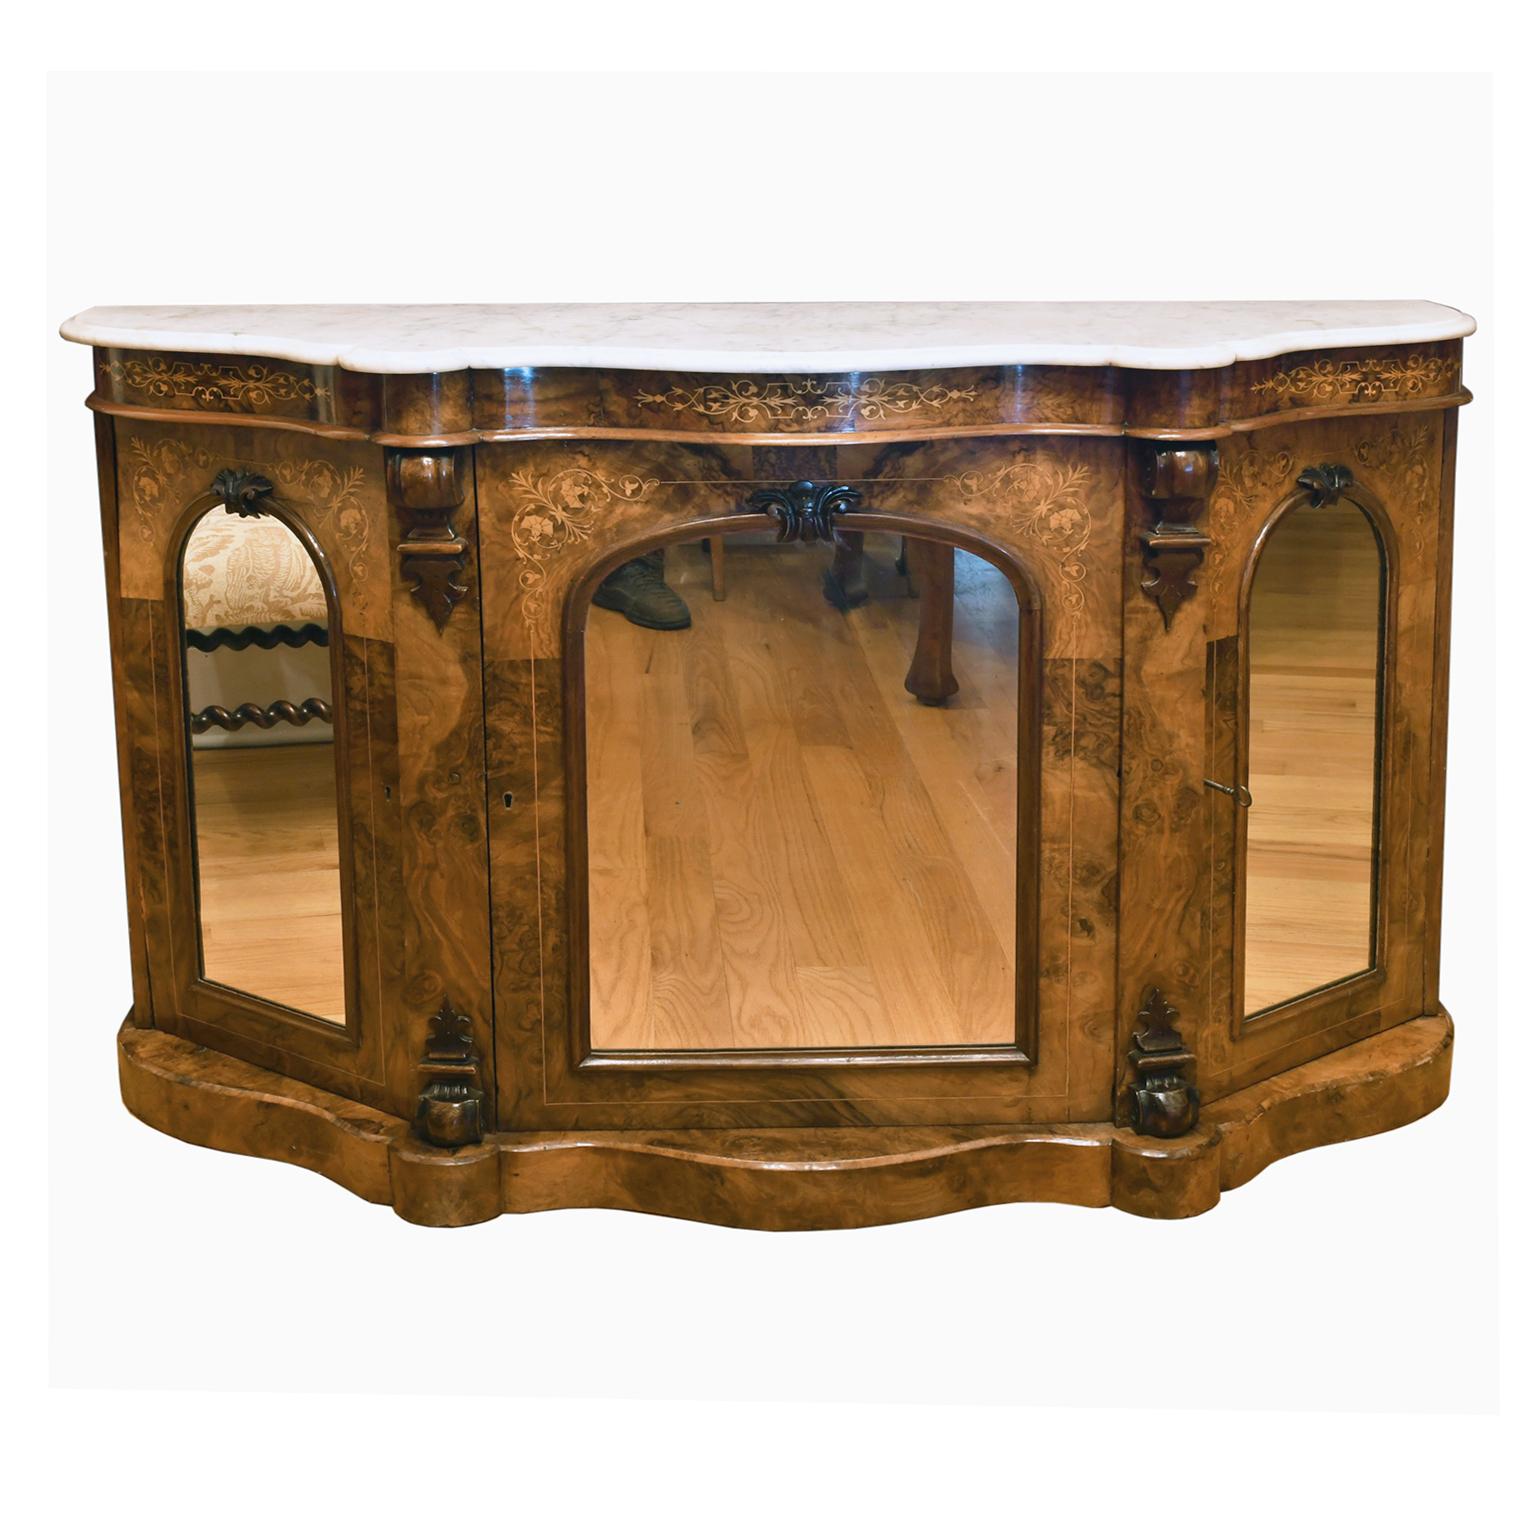 A lovely English Victorian console or credenza in burl walnut with satinwood and kingwood line inlays with original white Carrara marble top. Base offers three cabinet doors with arched mirrored panels that open to storage areas with a fixed shelf